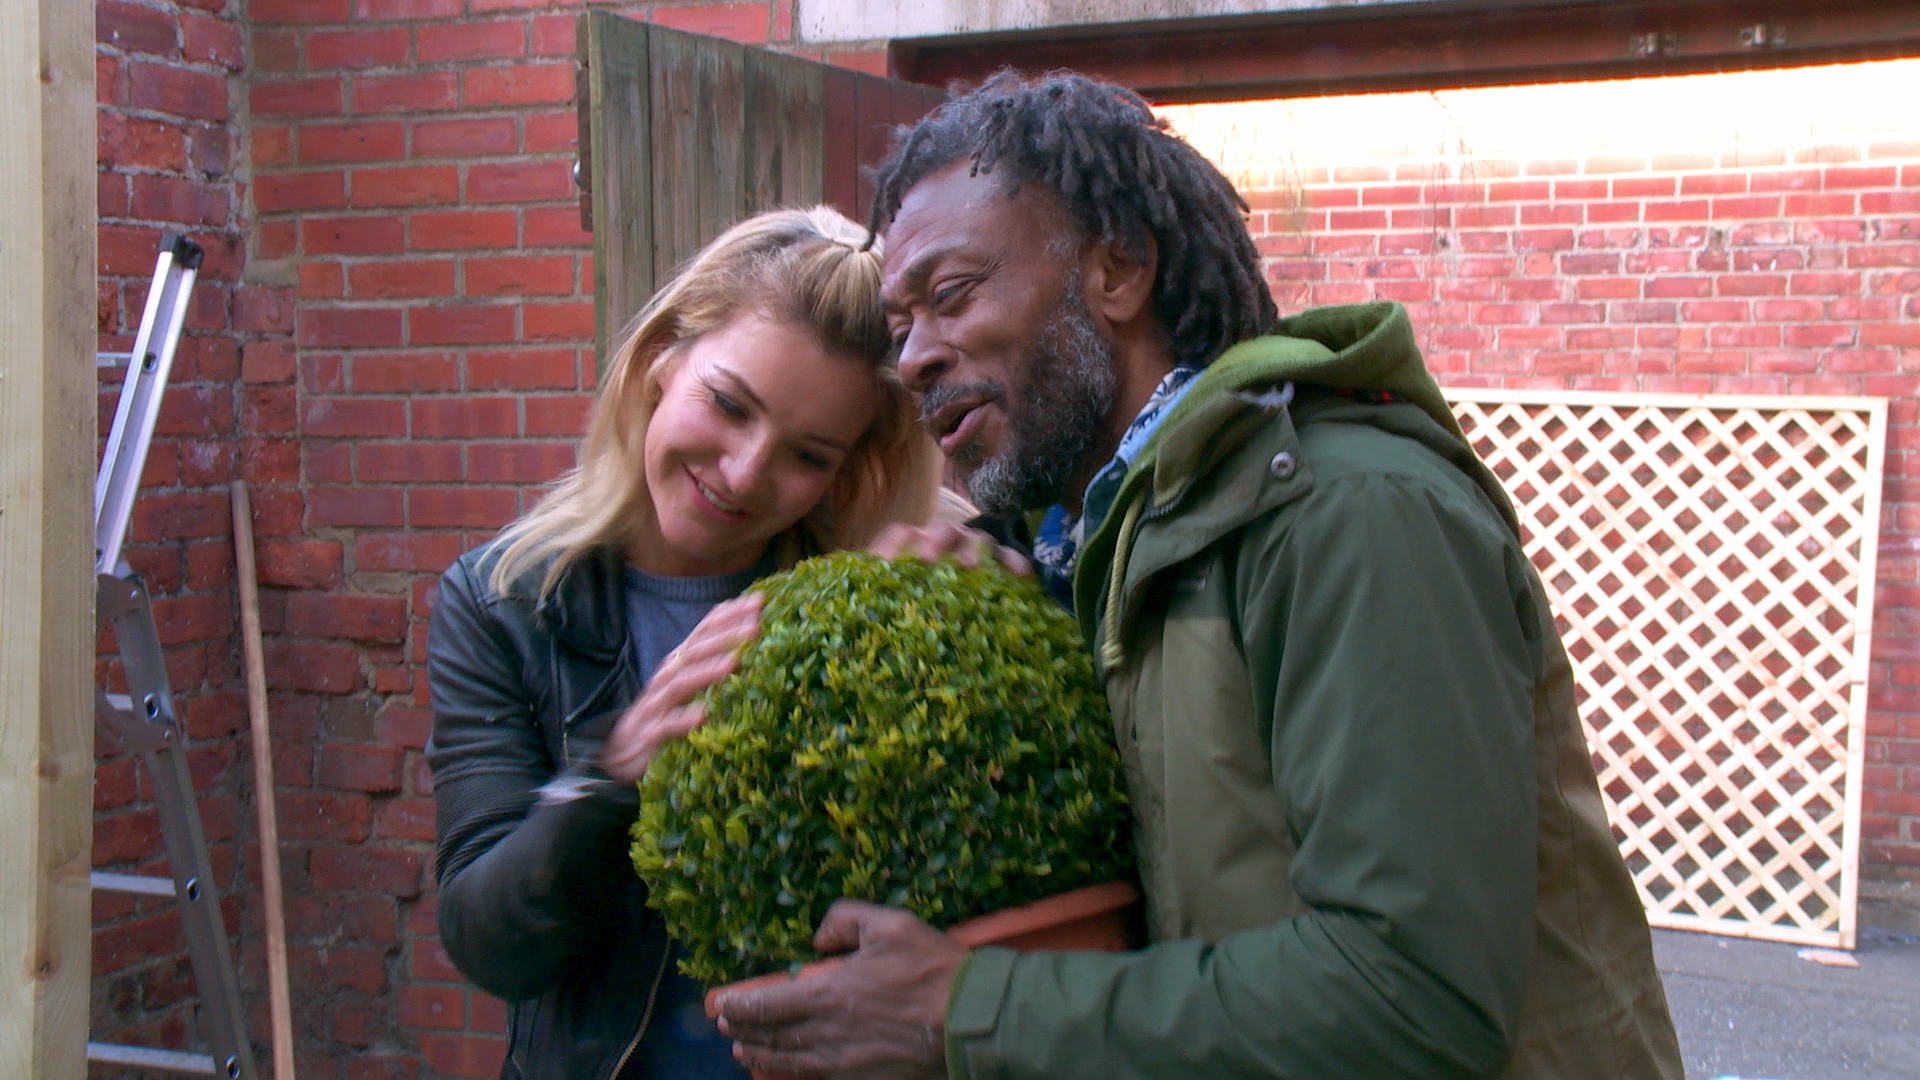 Danny Clarke is holding a round potted shrub and Helen Skelton is petting it and smiliing. Danny is wearing a green mac and has  black greying locs. Helen has blonde shoulder length hair and is weather a leather coat an a blue tshirt. Behidn them is a read bridge wall and a loose lattice fence leaning against the wall.